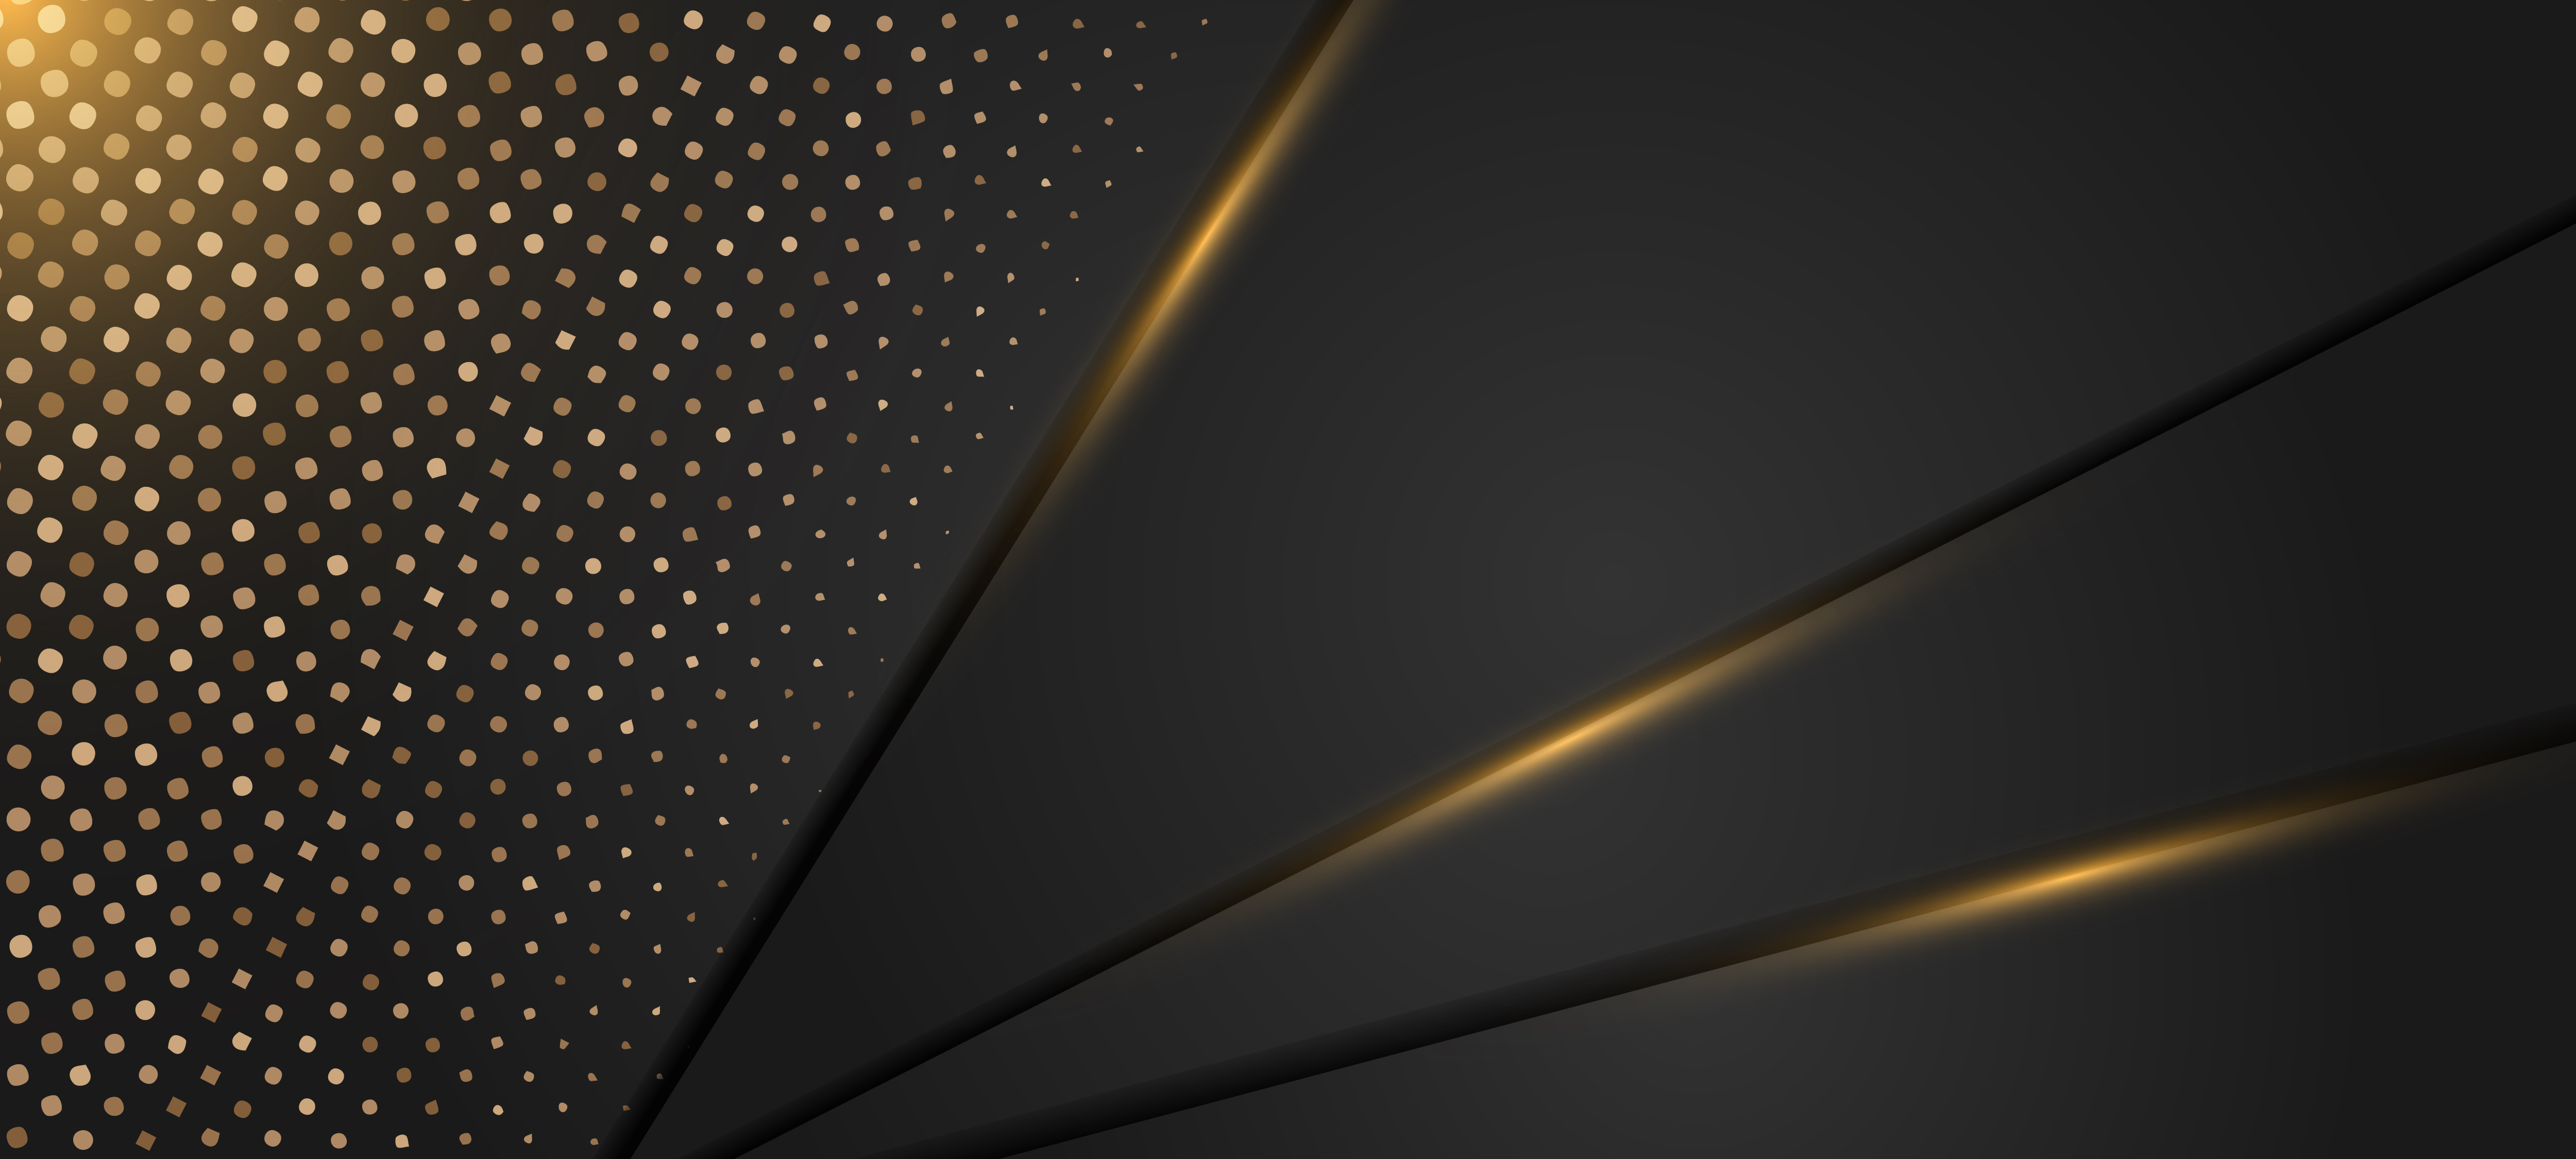 🔥 Download Elegant Gold And Black Dotted Background by @duanef59